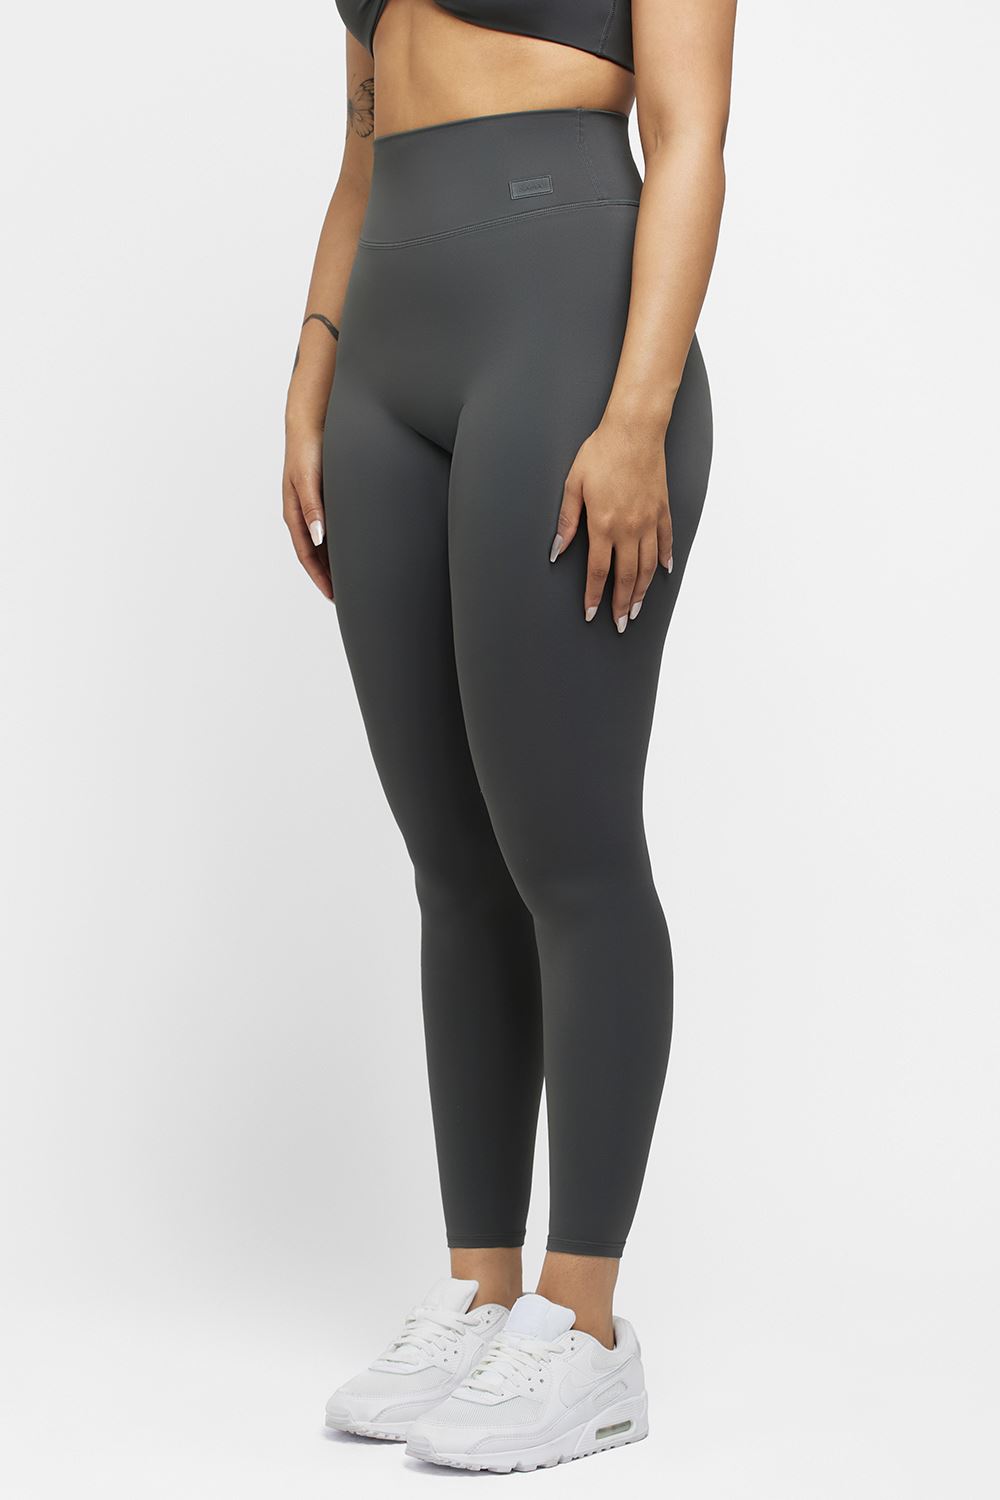 Nike Sculpture Victory Women's Training Tights (Black/White, XS)